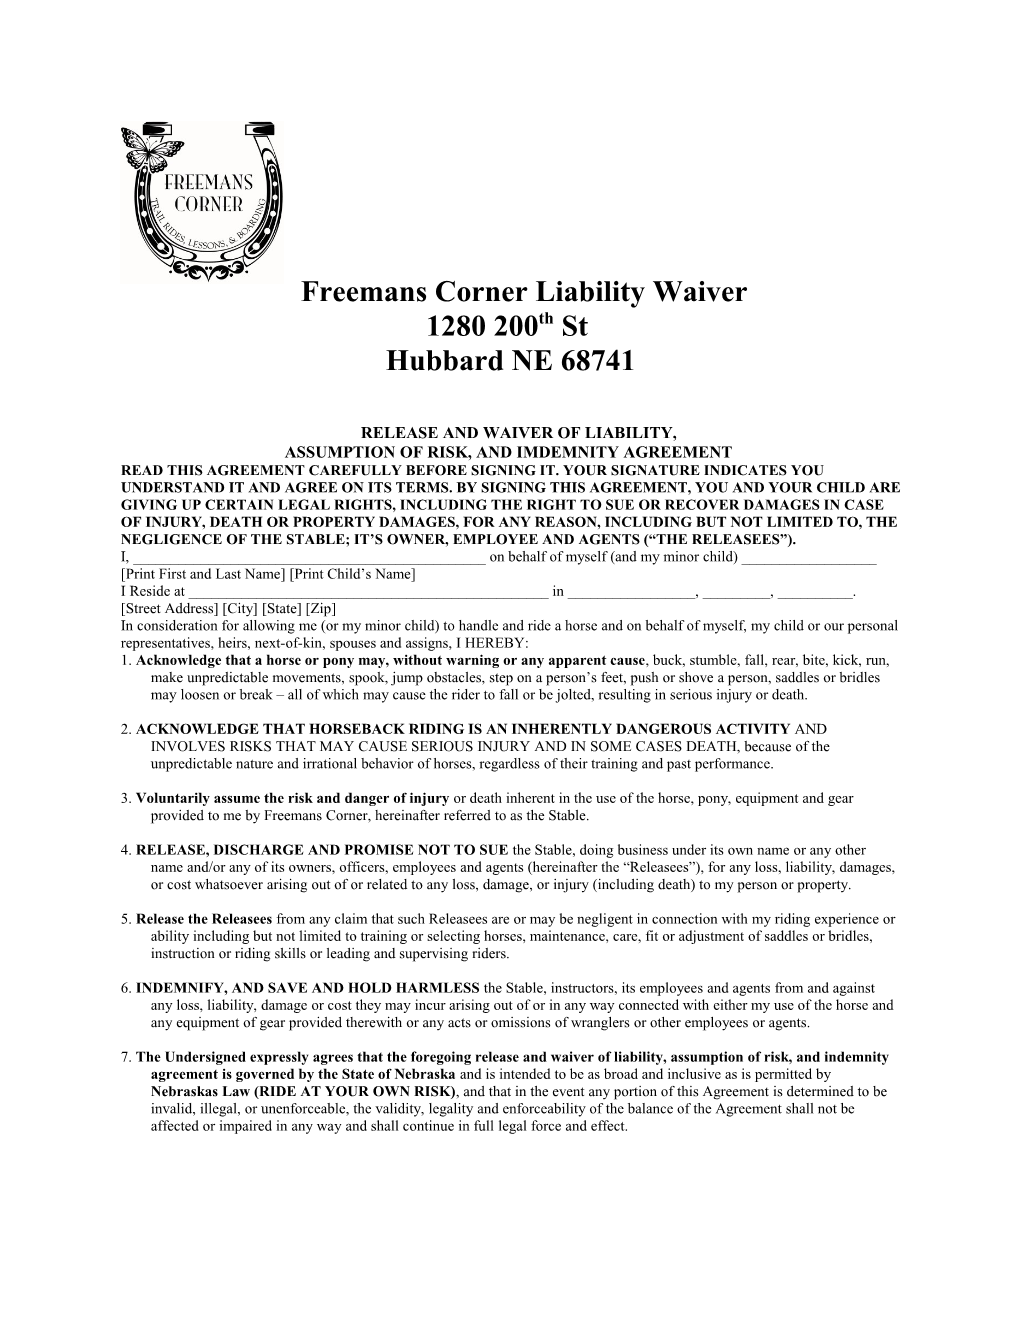 Release and Waiver of Liability s4